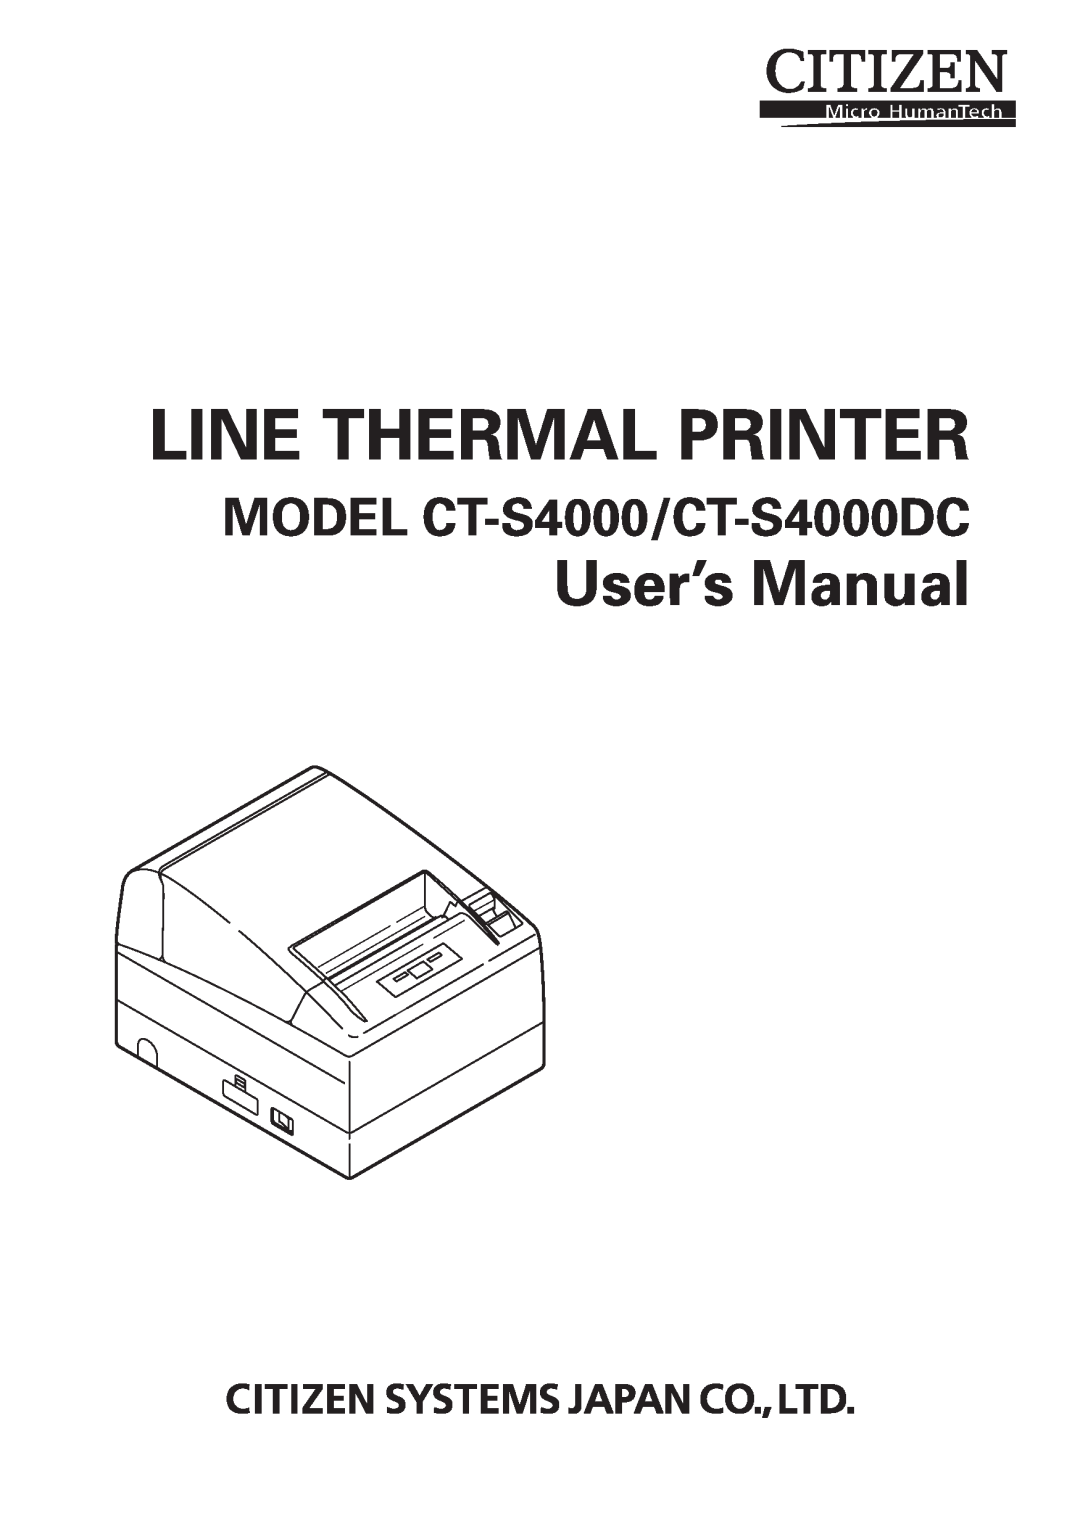 Citizen Systems user manual Line Thermal Printer, User’s Manual, MODEL CT-S4000/CT-S4000DC 